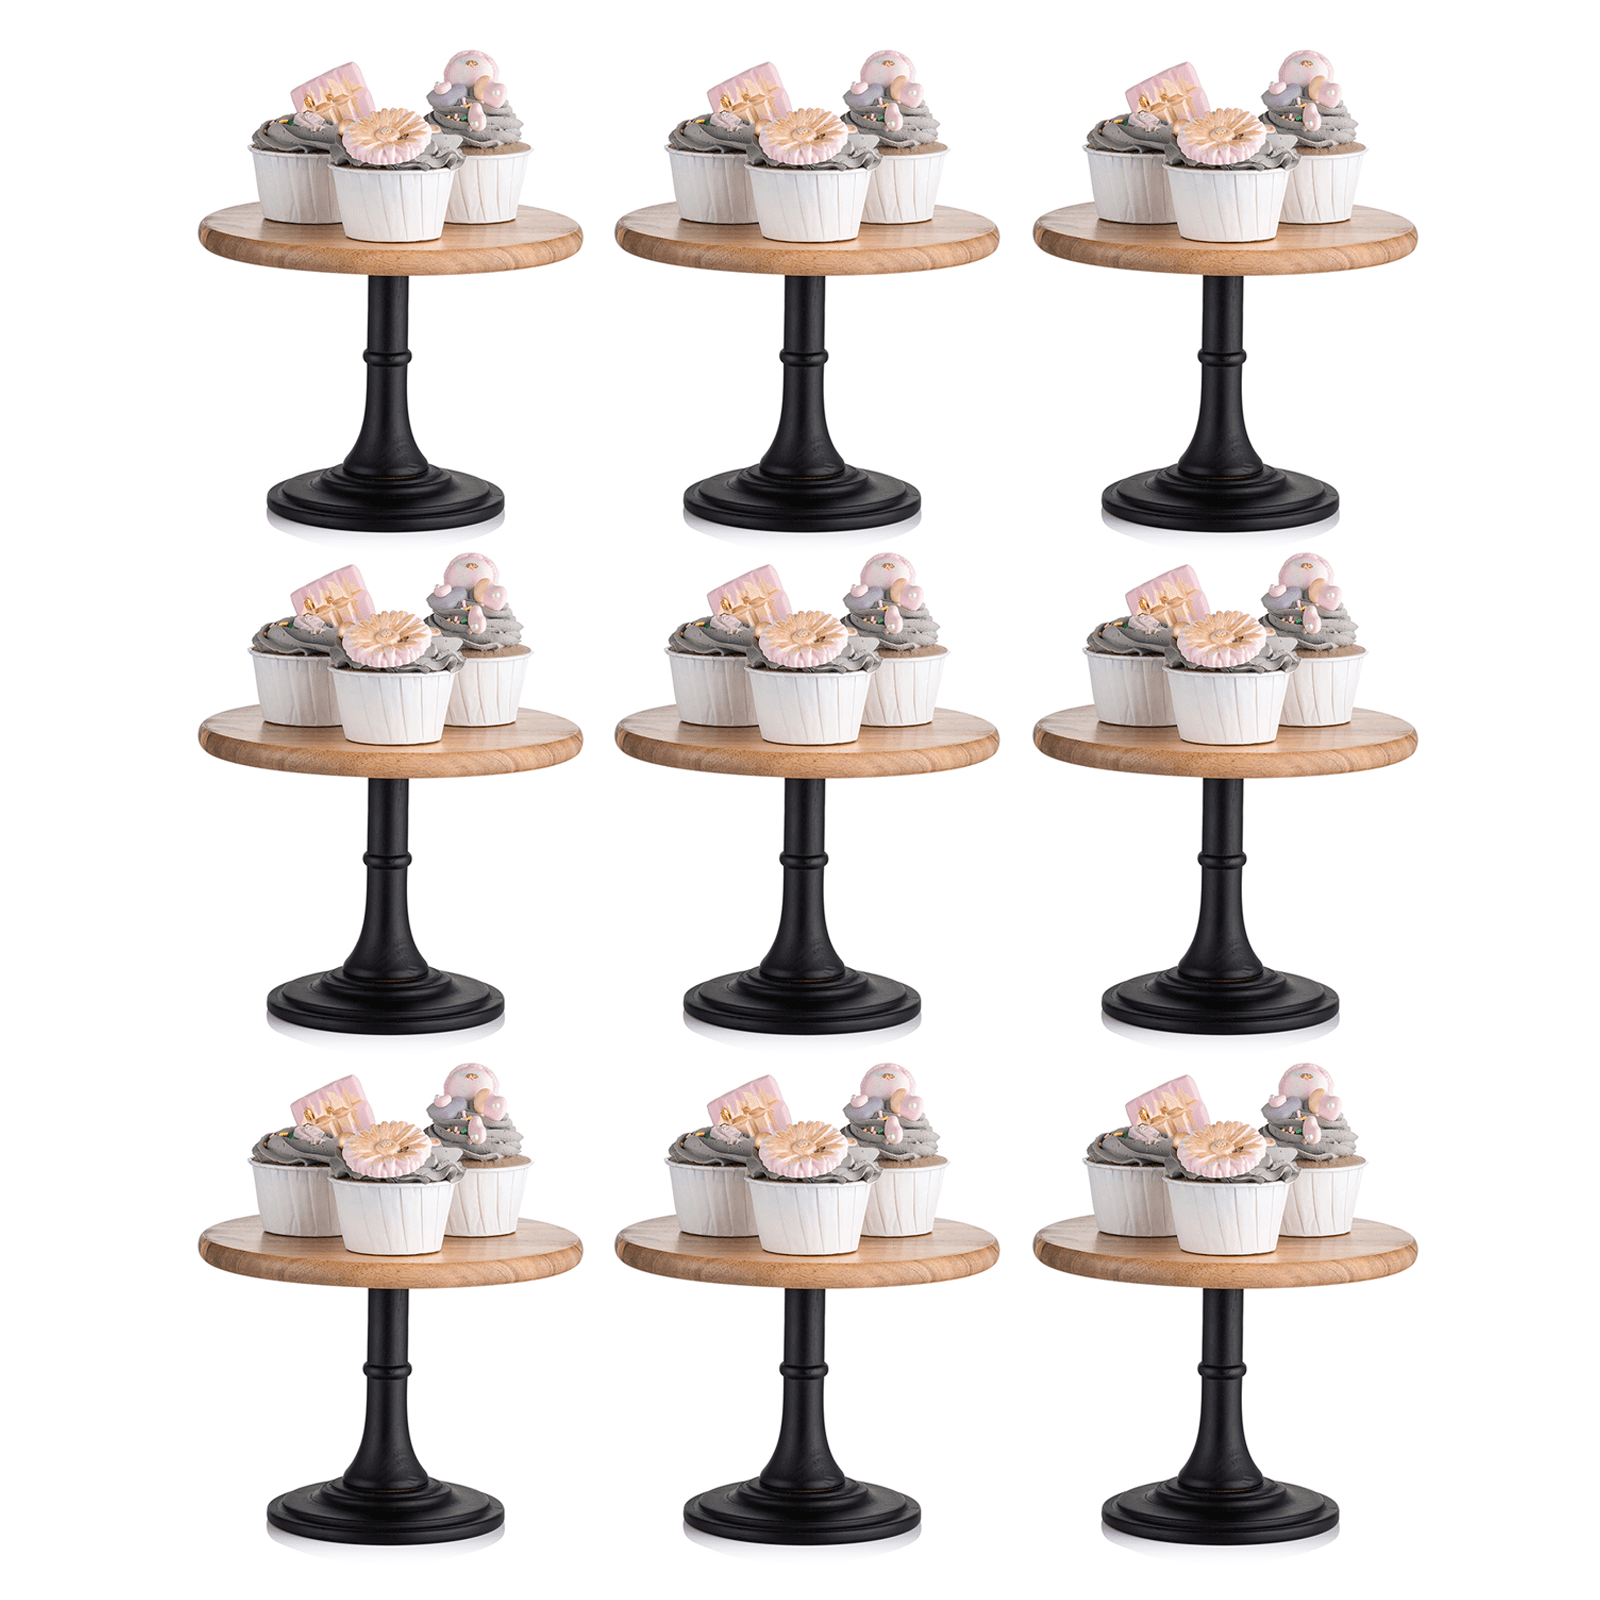 Ideal for all types of baked treats including cakes Rustic wood design. cup-cakes 12 Inch Diameter Wooden Cake Stand on Pedestal pastries multi-tier cakes bundt cakes birthday cake